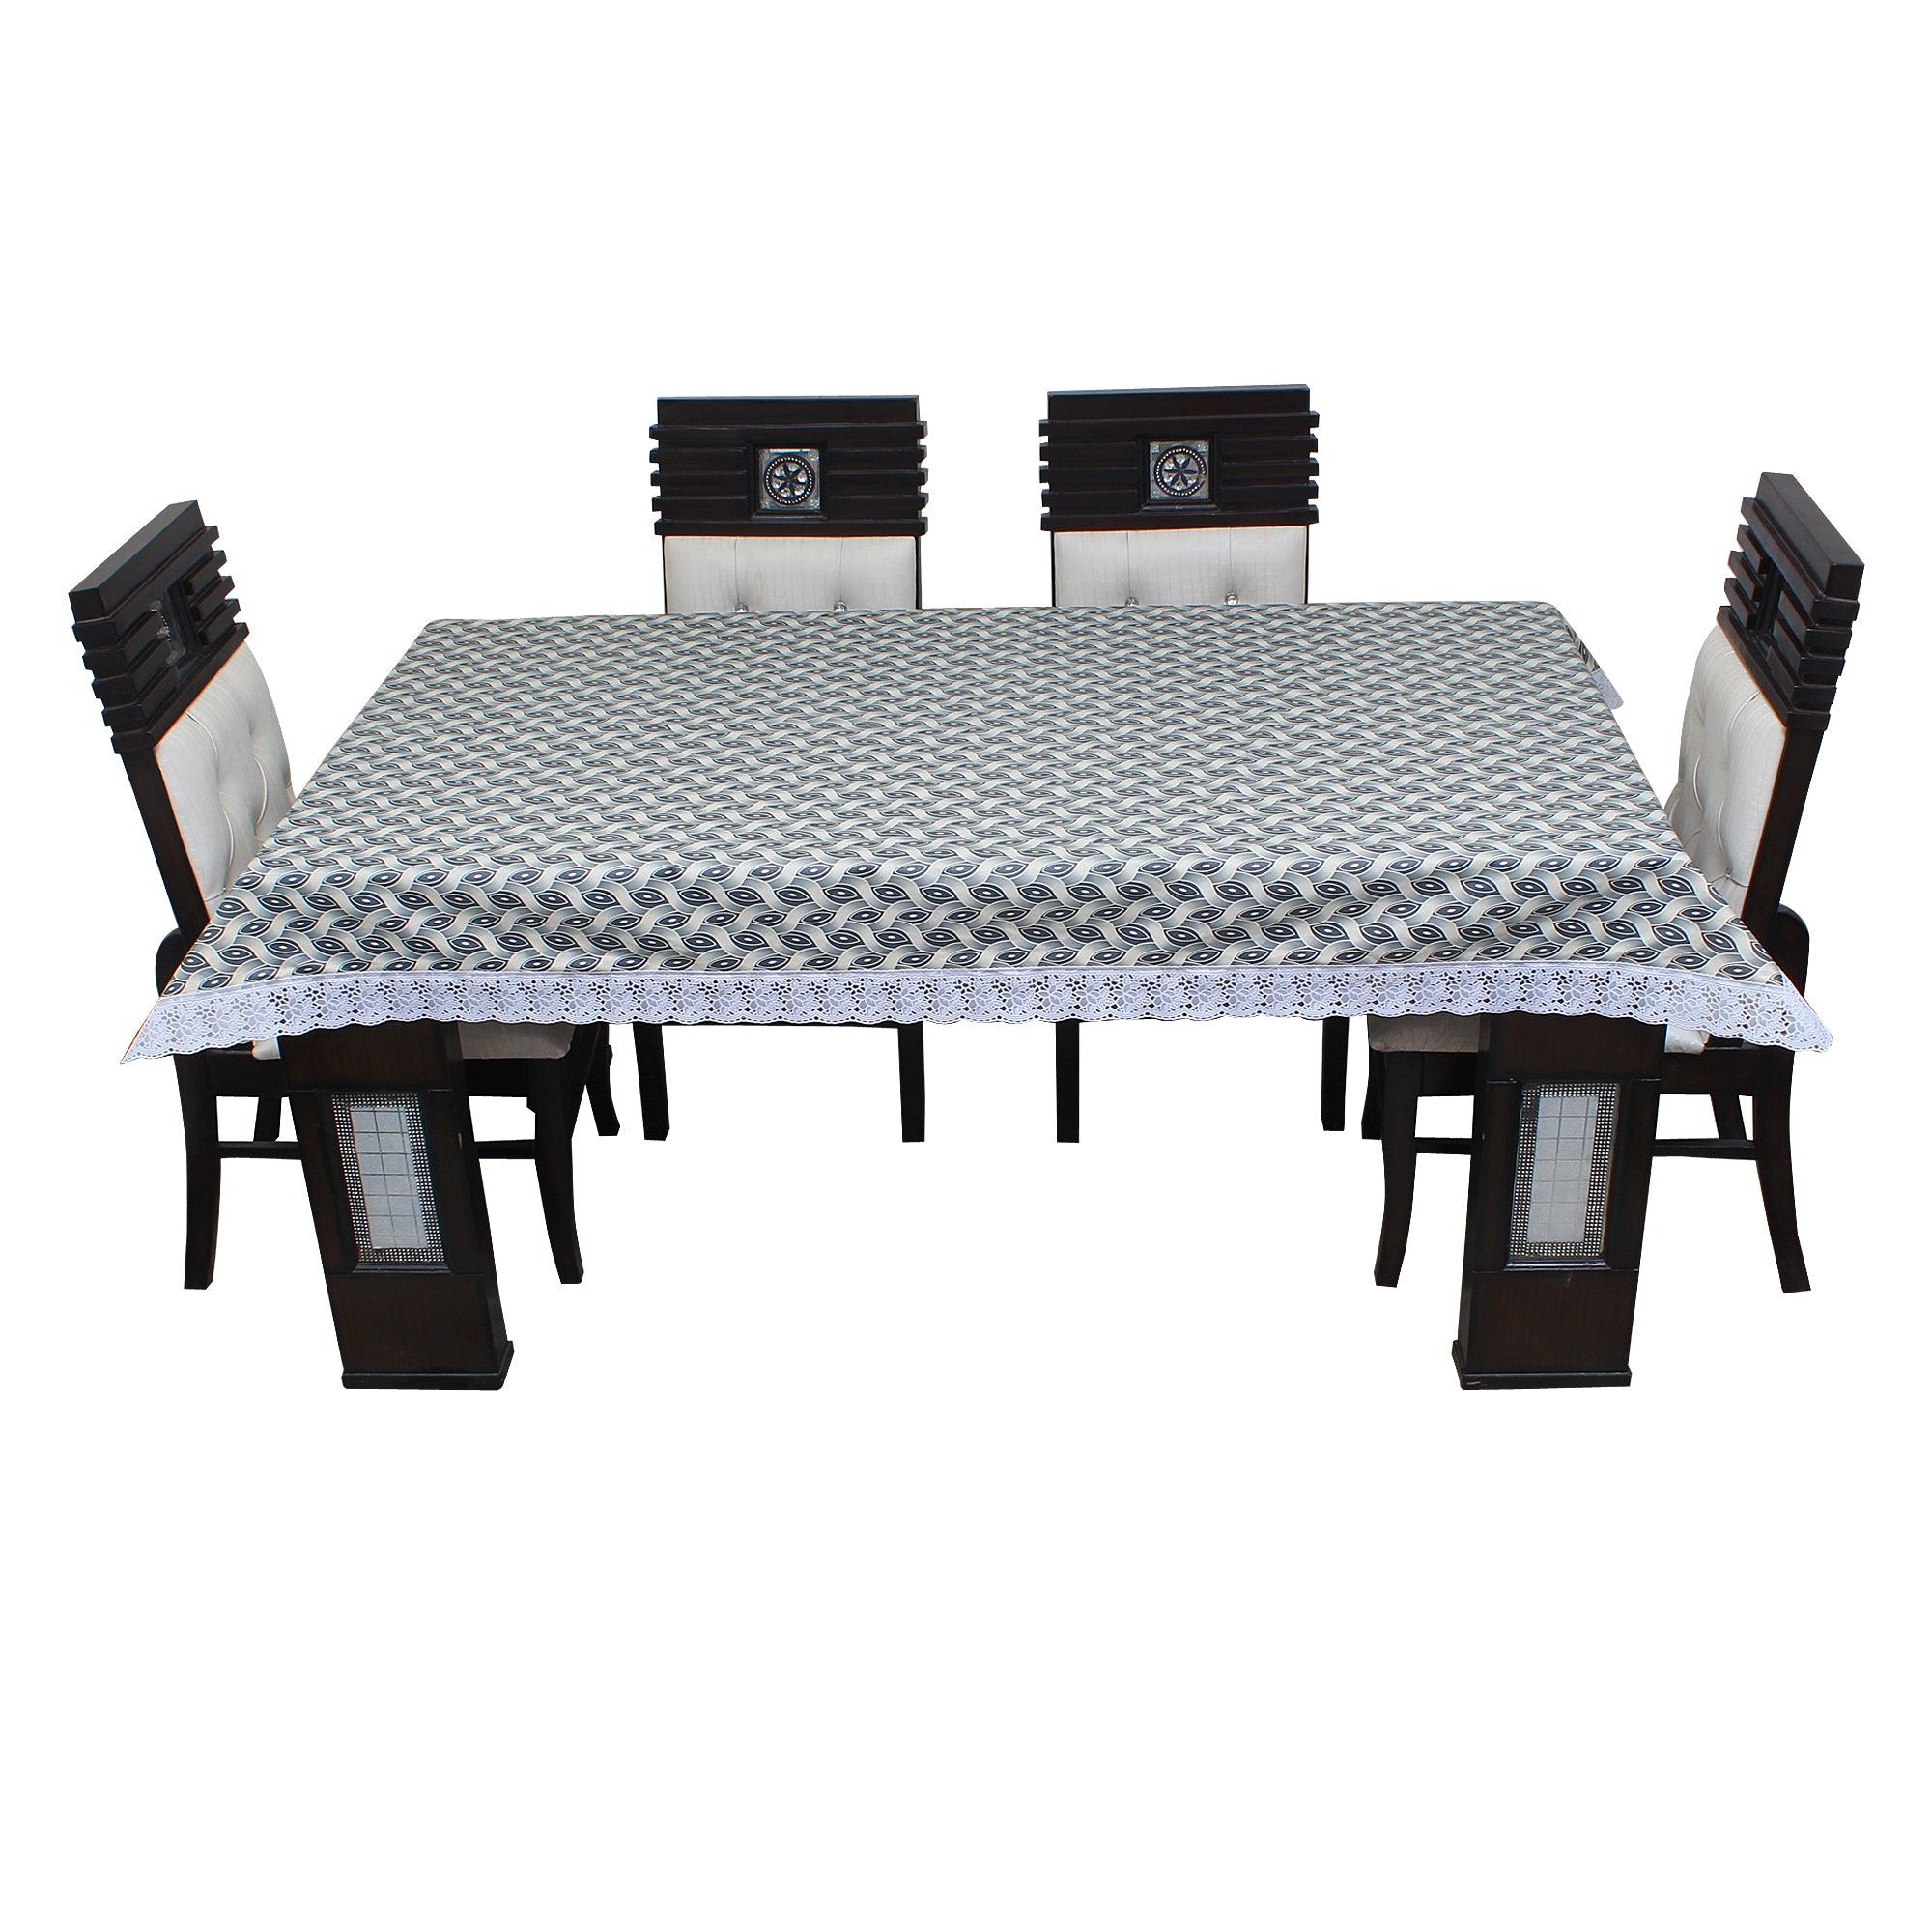 Waterproof and Dustproof Dining Table Cover, SA69 - Dream Care Furnishings Private Limited